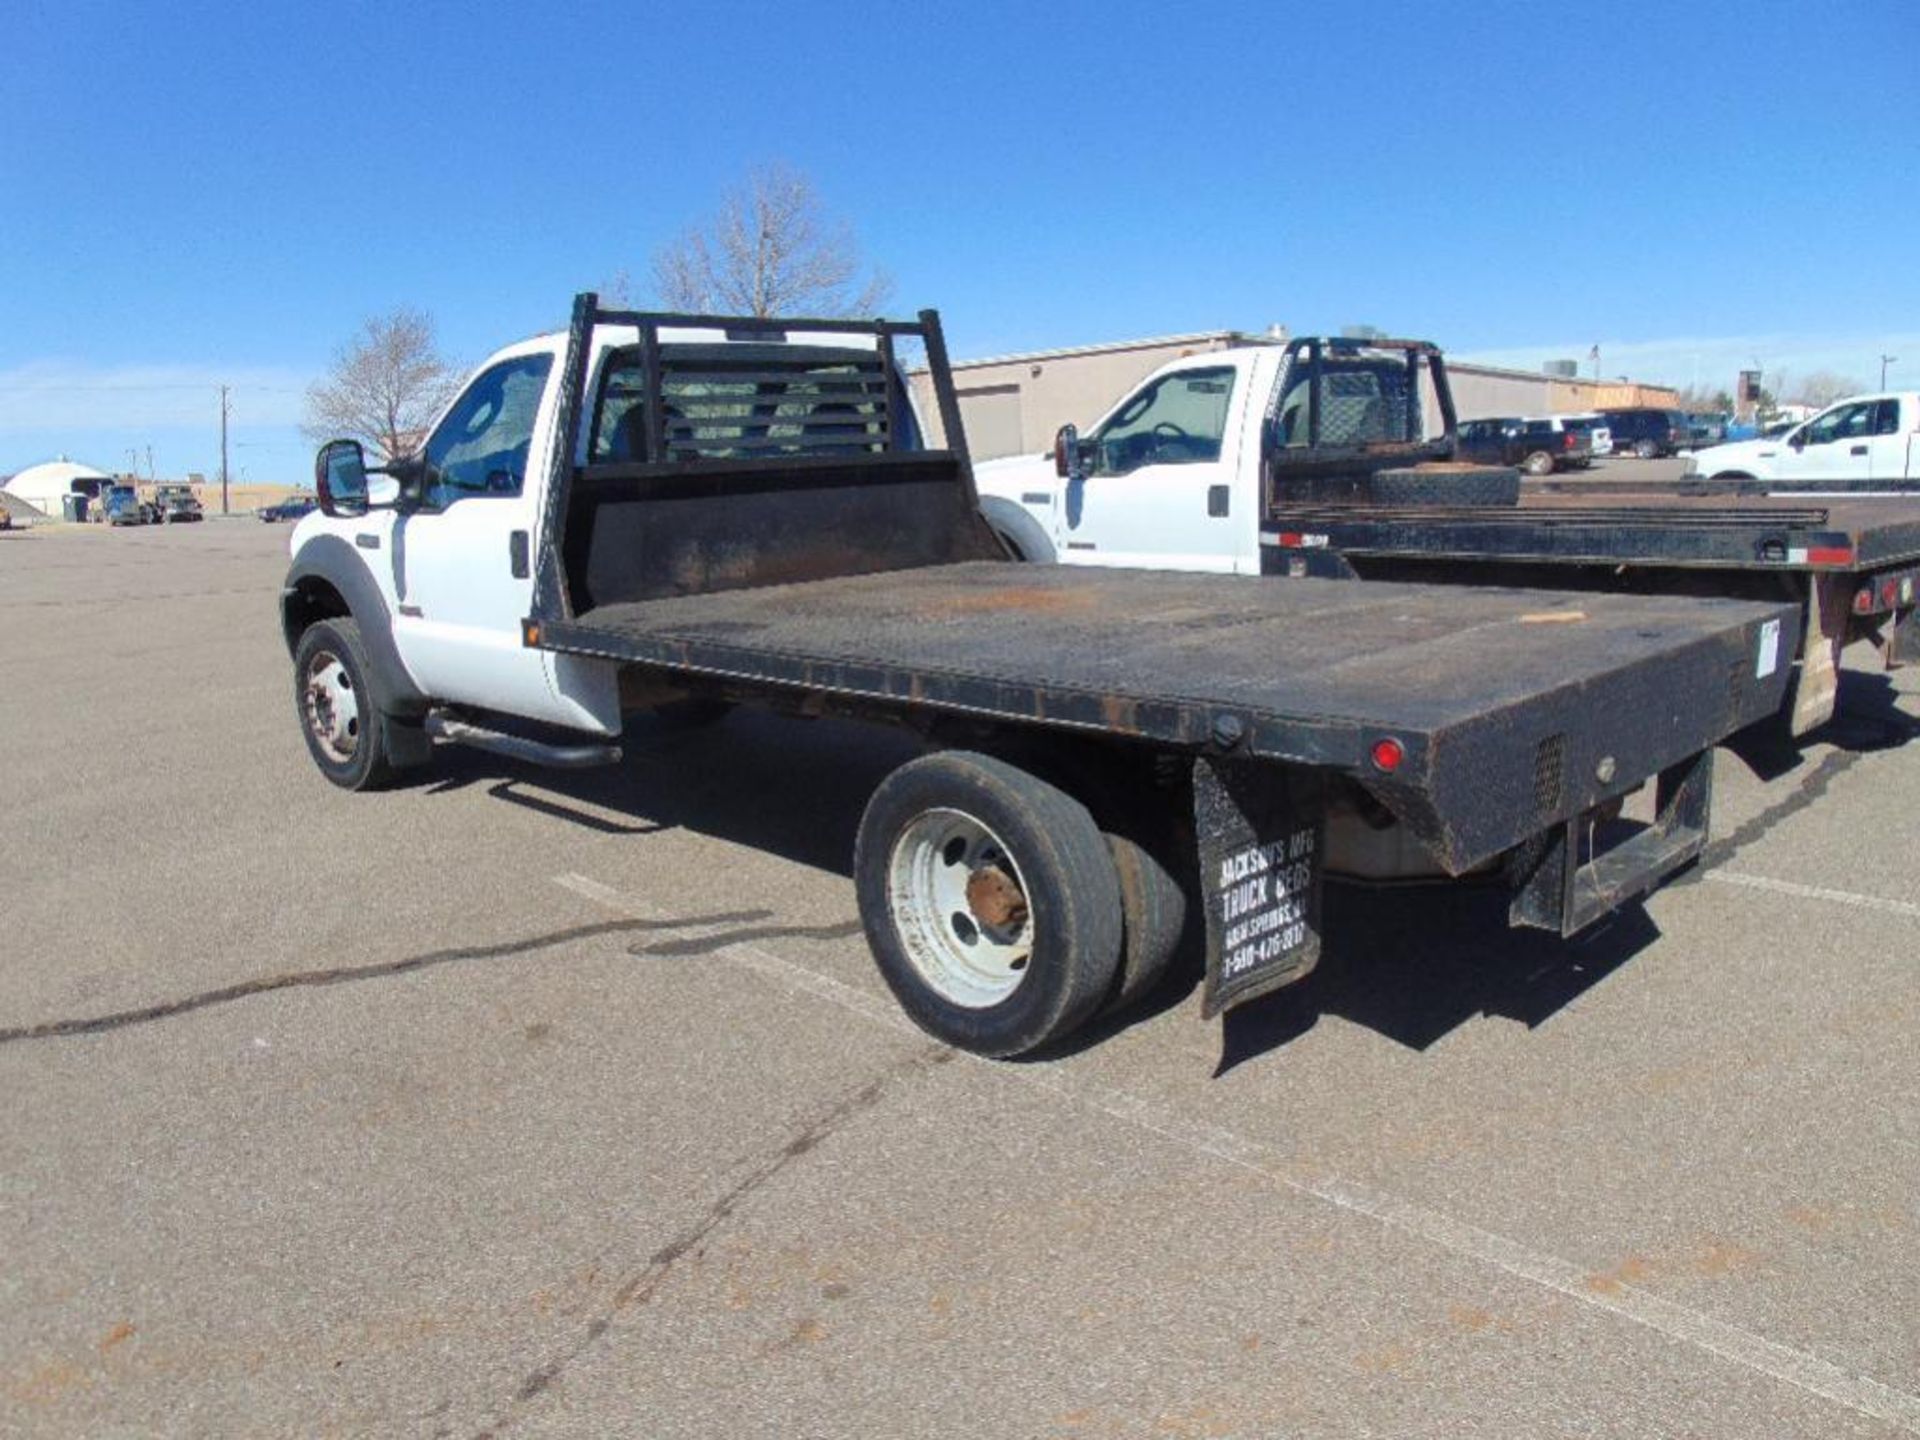 2005 Ford F450 Truck w/92" flatbed s/n 1fxf46p35ed26390, 6.0 powerstroke eng, auto trans, od reads - Image 2 of 3